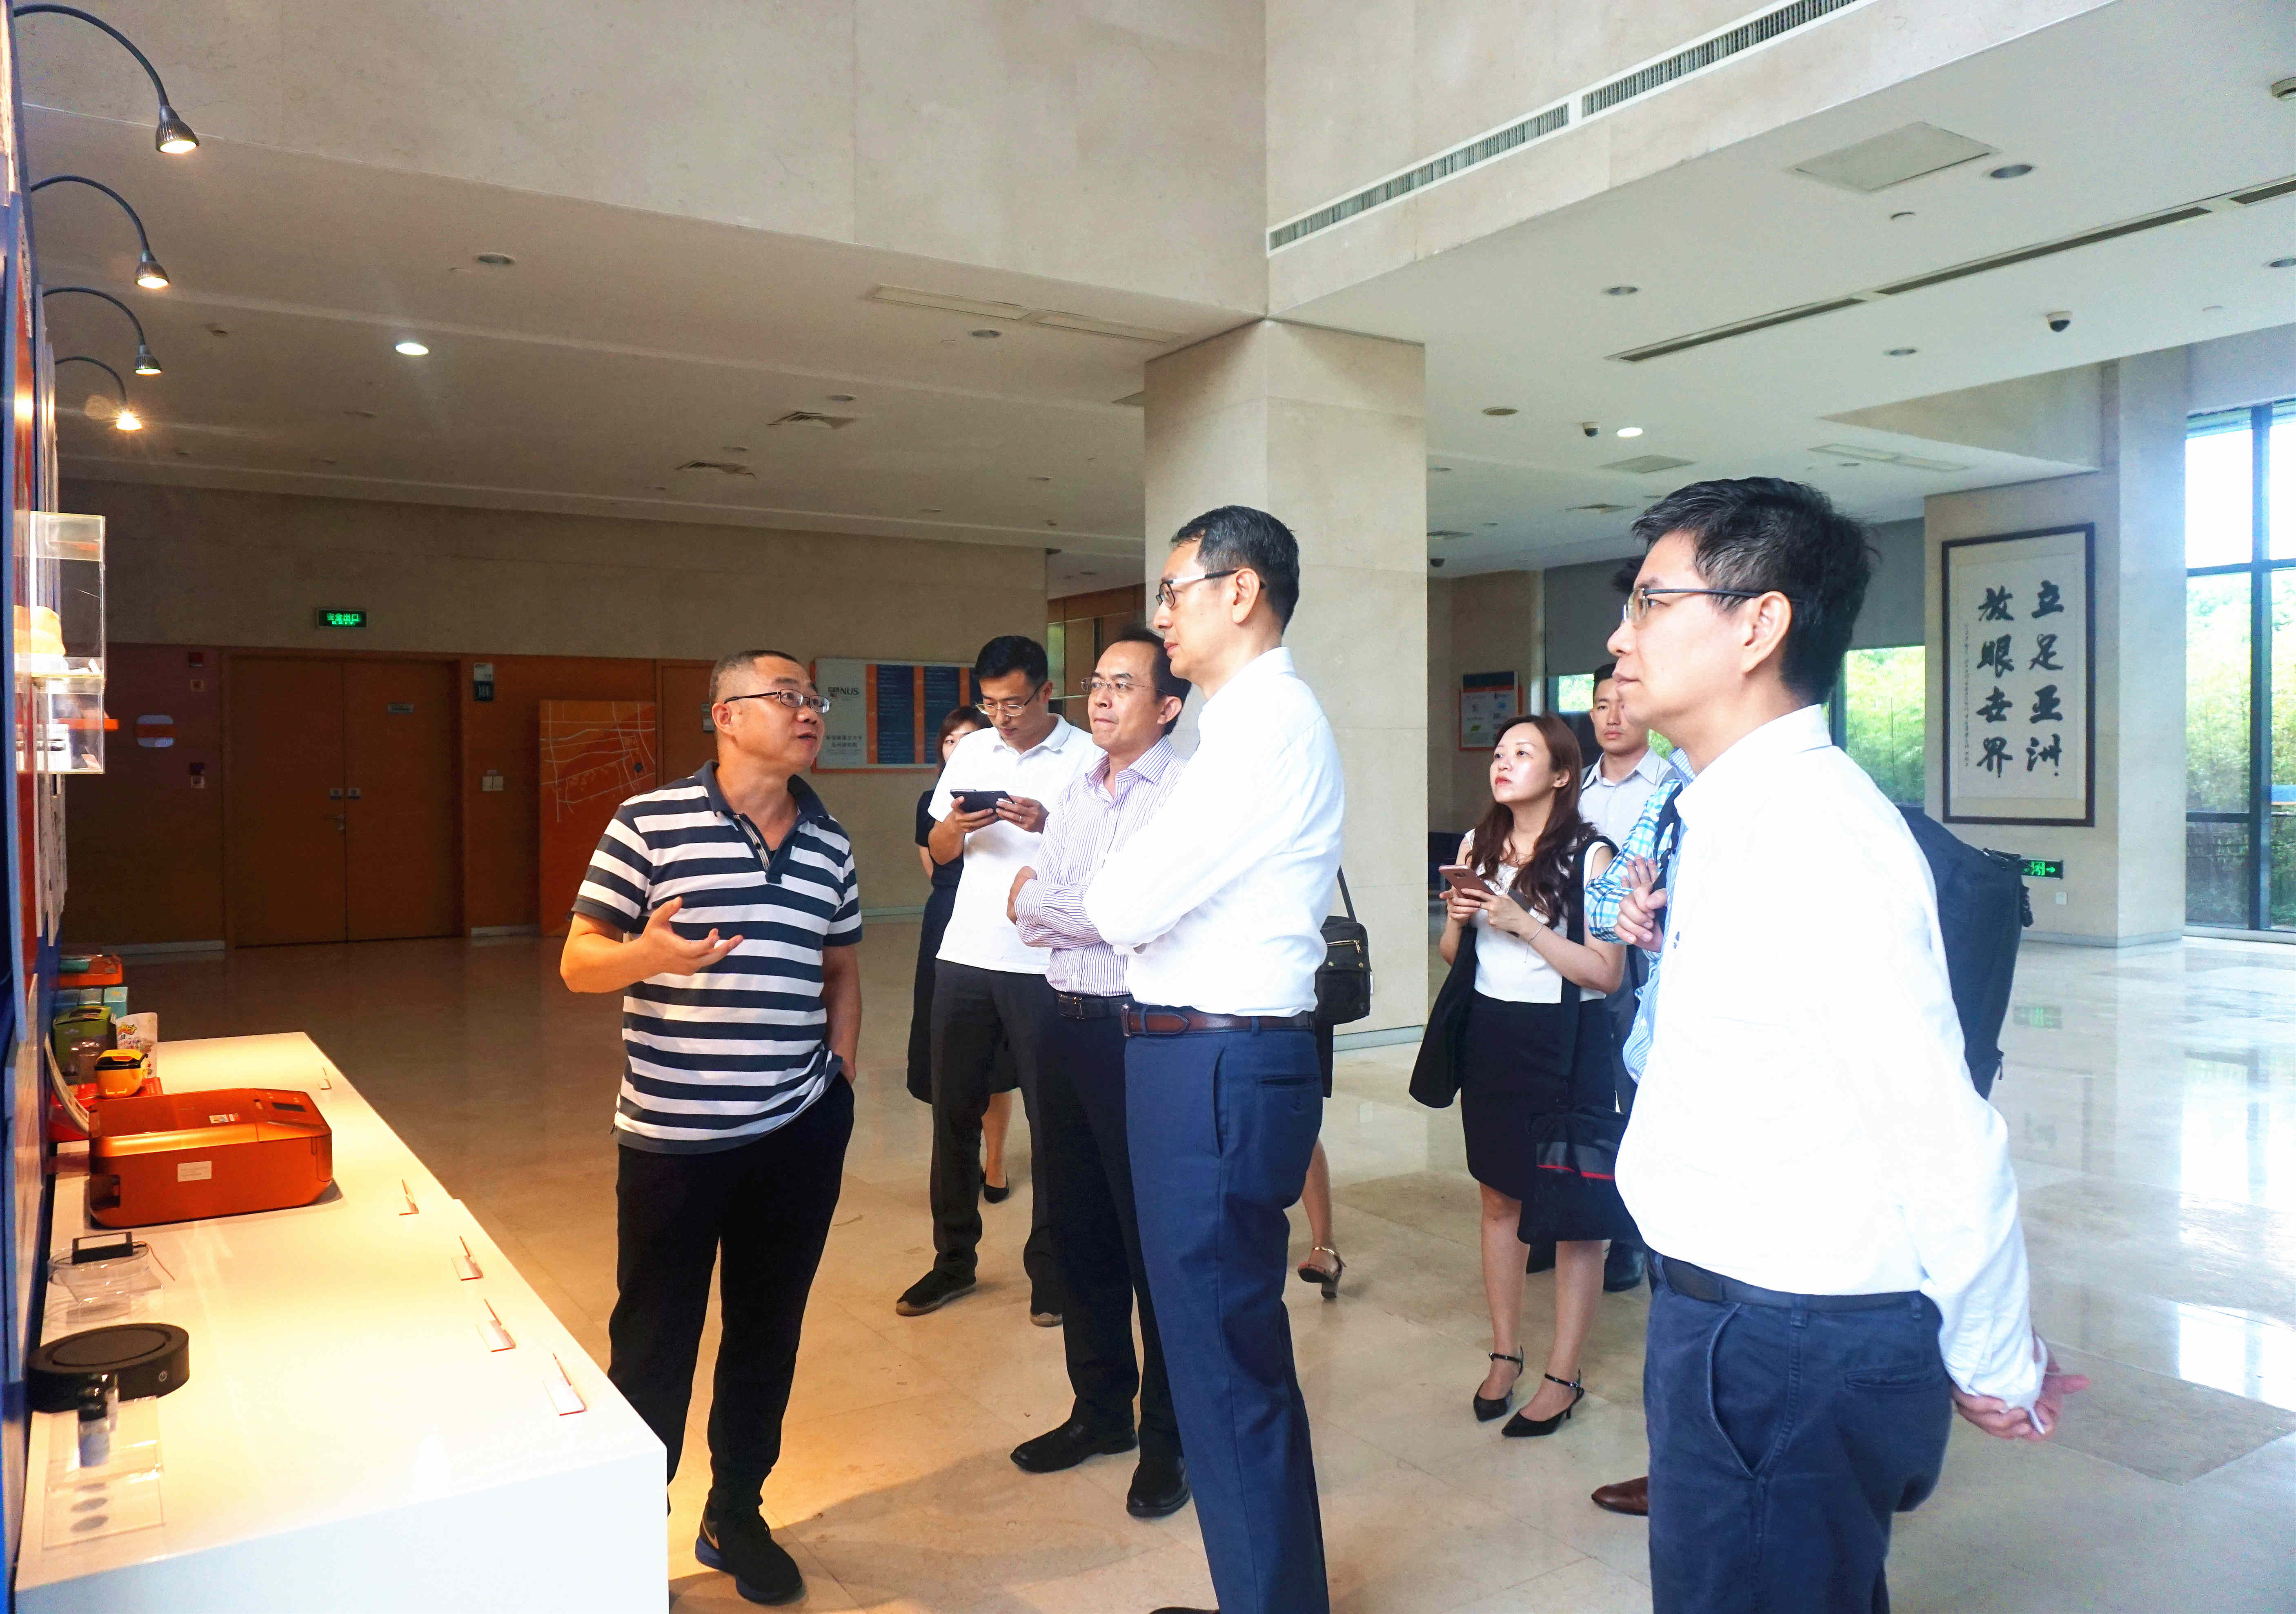 Visit by delegation from A*STAR led by Mr Philip Lim